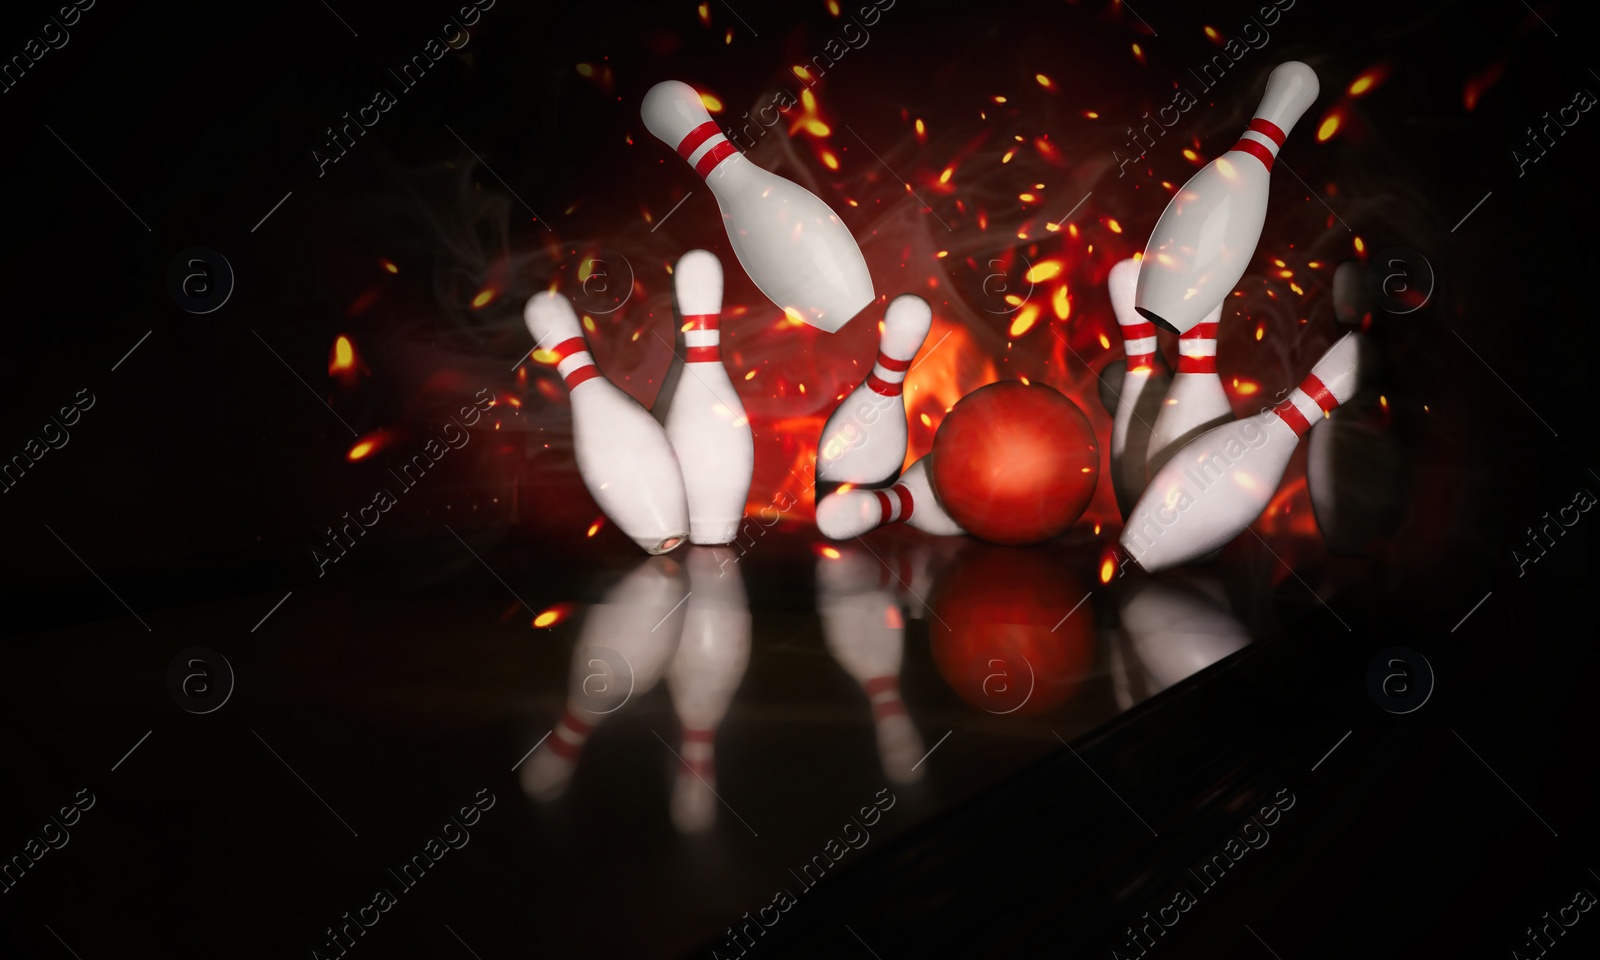 Image of Bowling ball bouncing pins with fire. Successful hit - strike